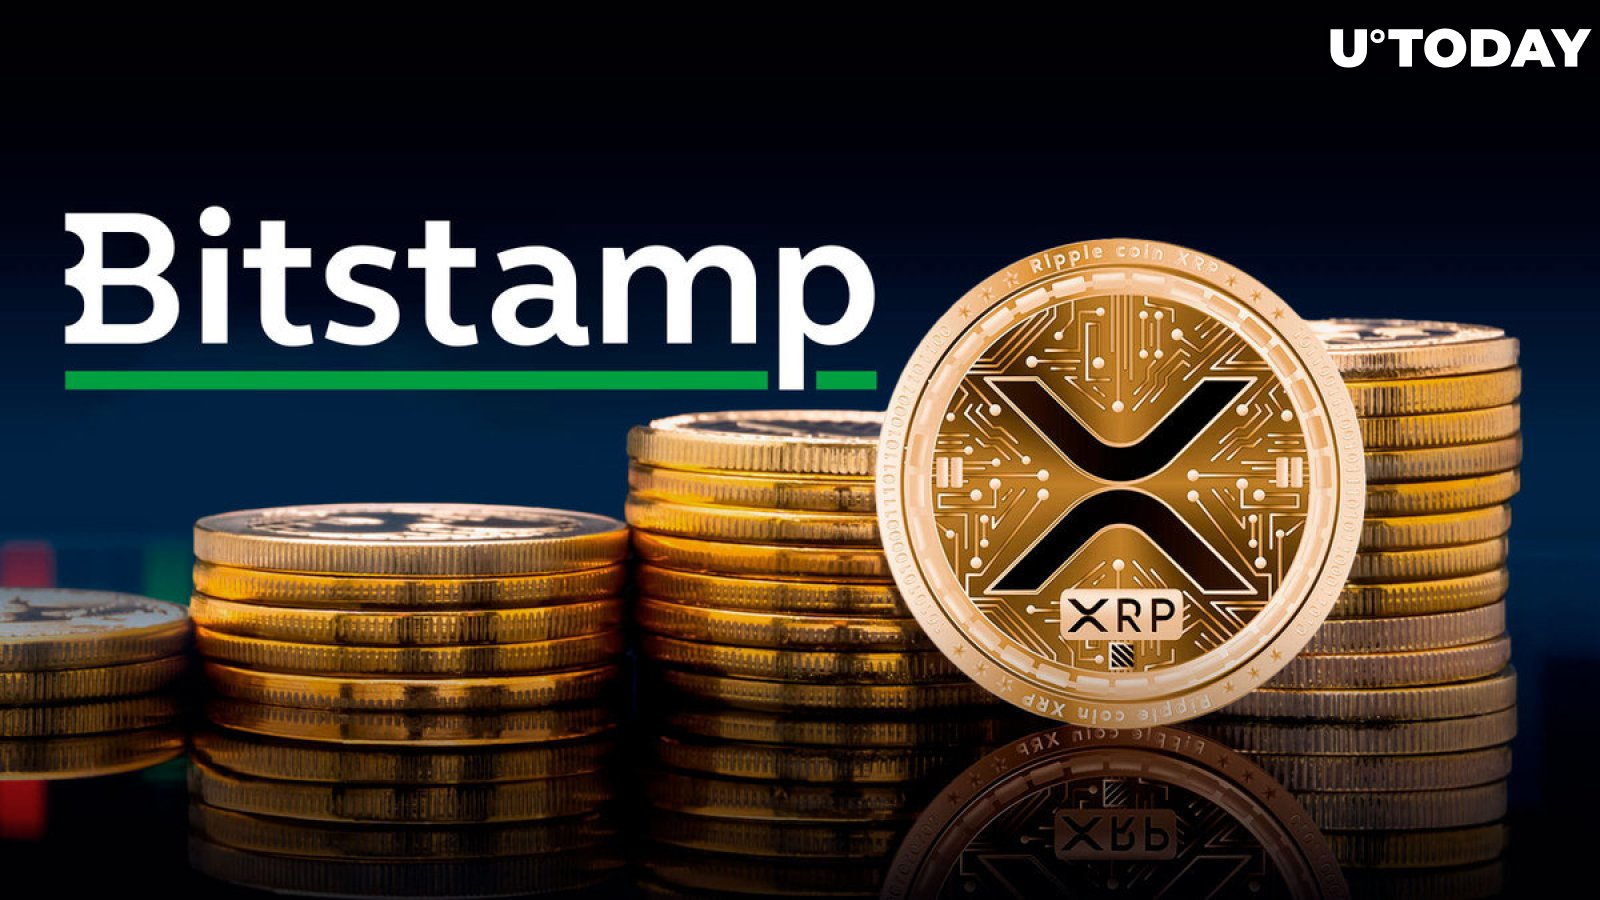 Millions of XRP Find Their Way to Bitstamp, Important Anonymous Sender Exposed